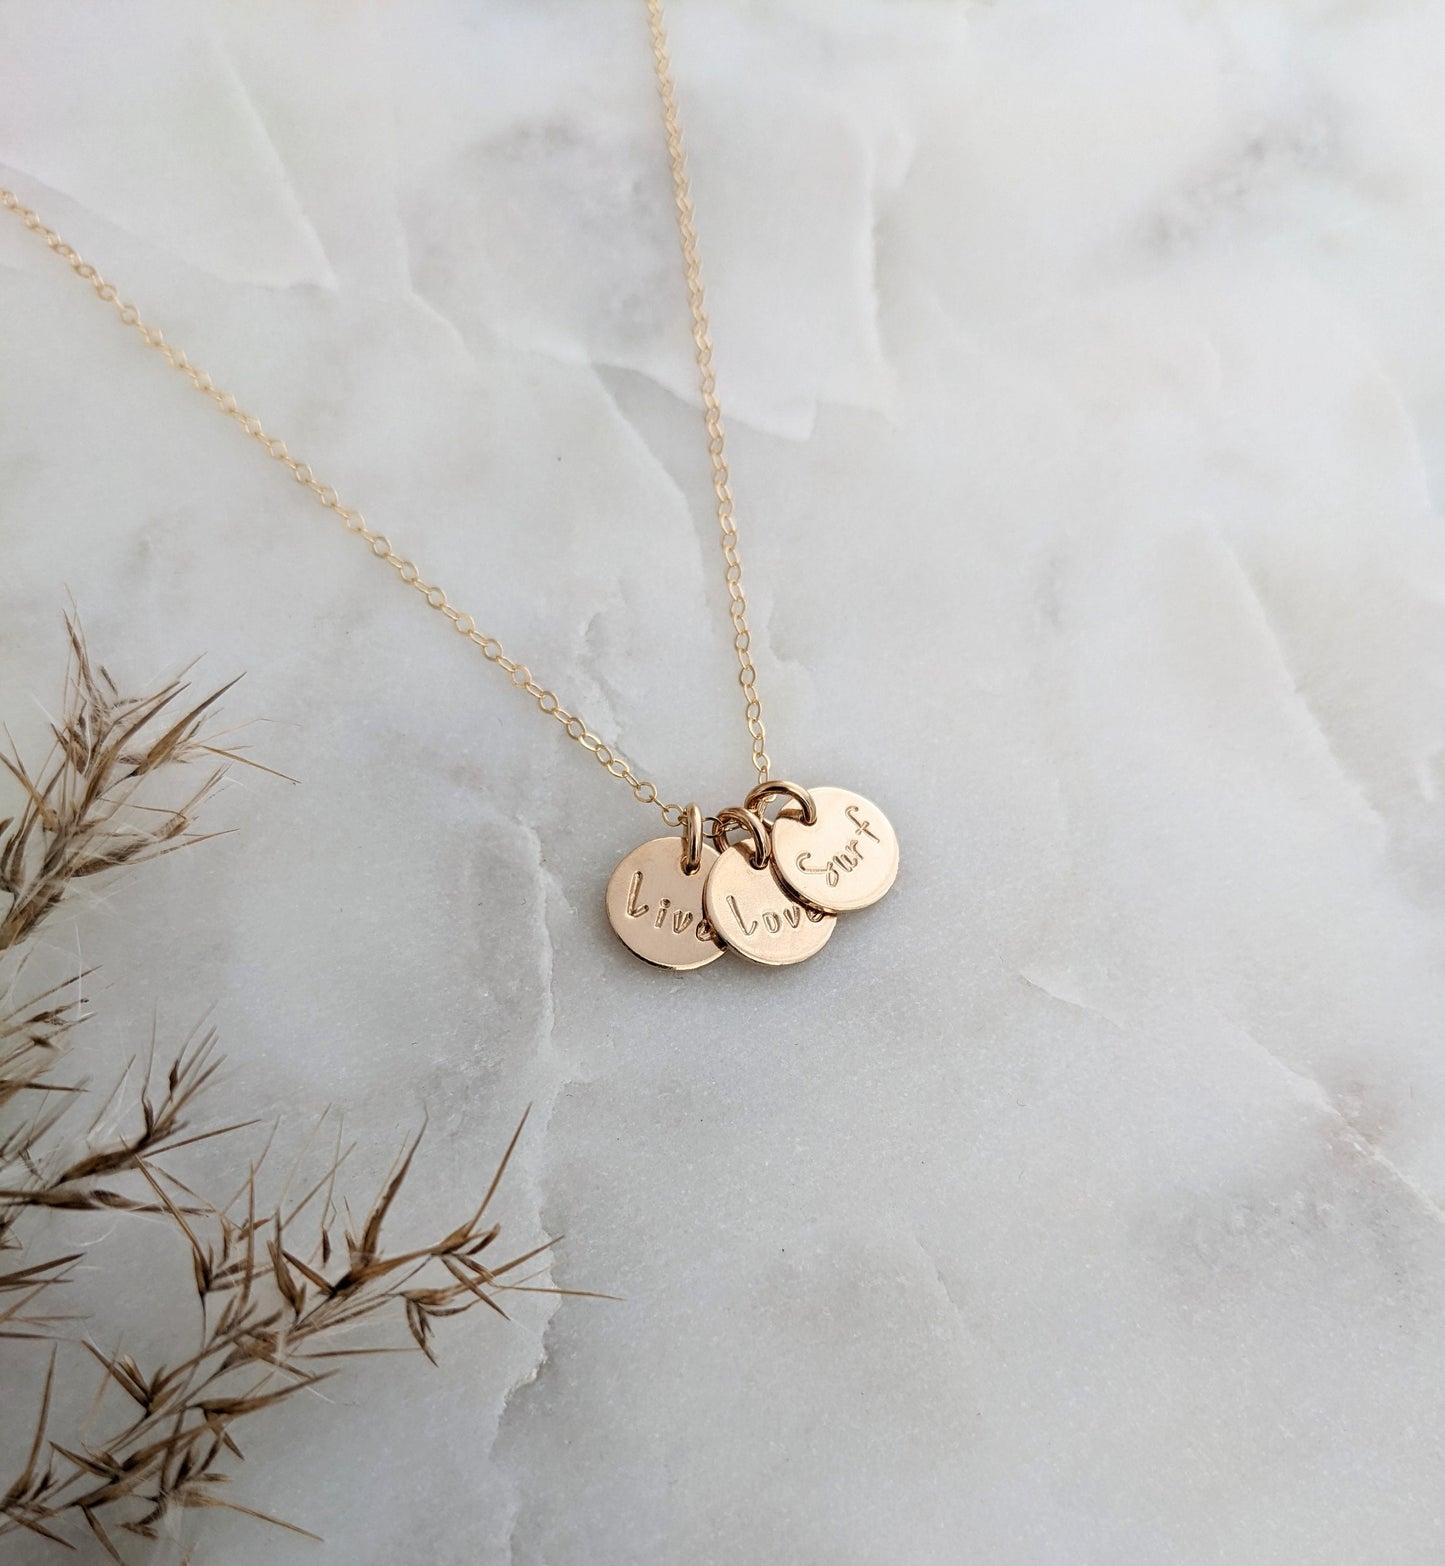 Live, Love, Surf Necklace | Gold fill or Sterling Silver